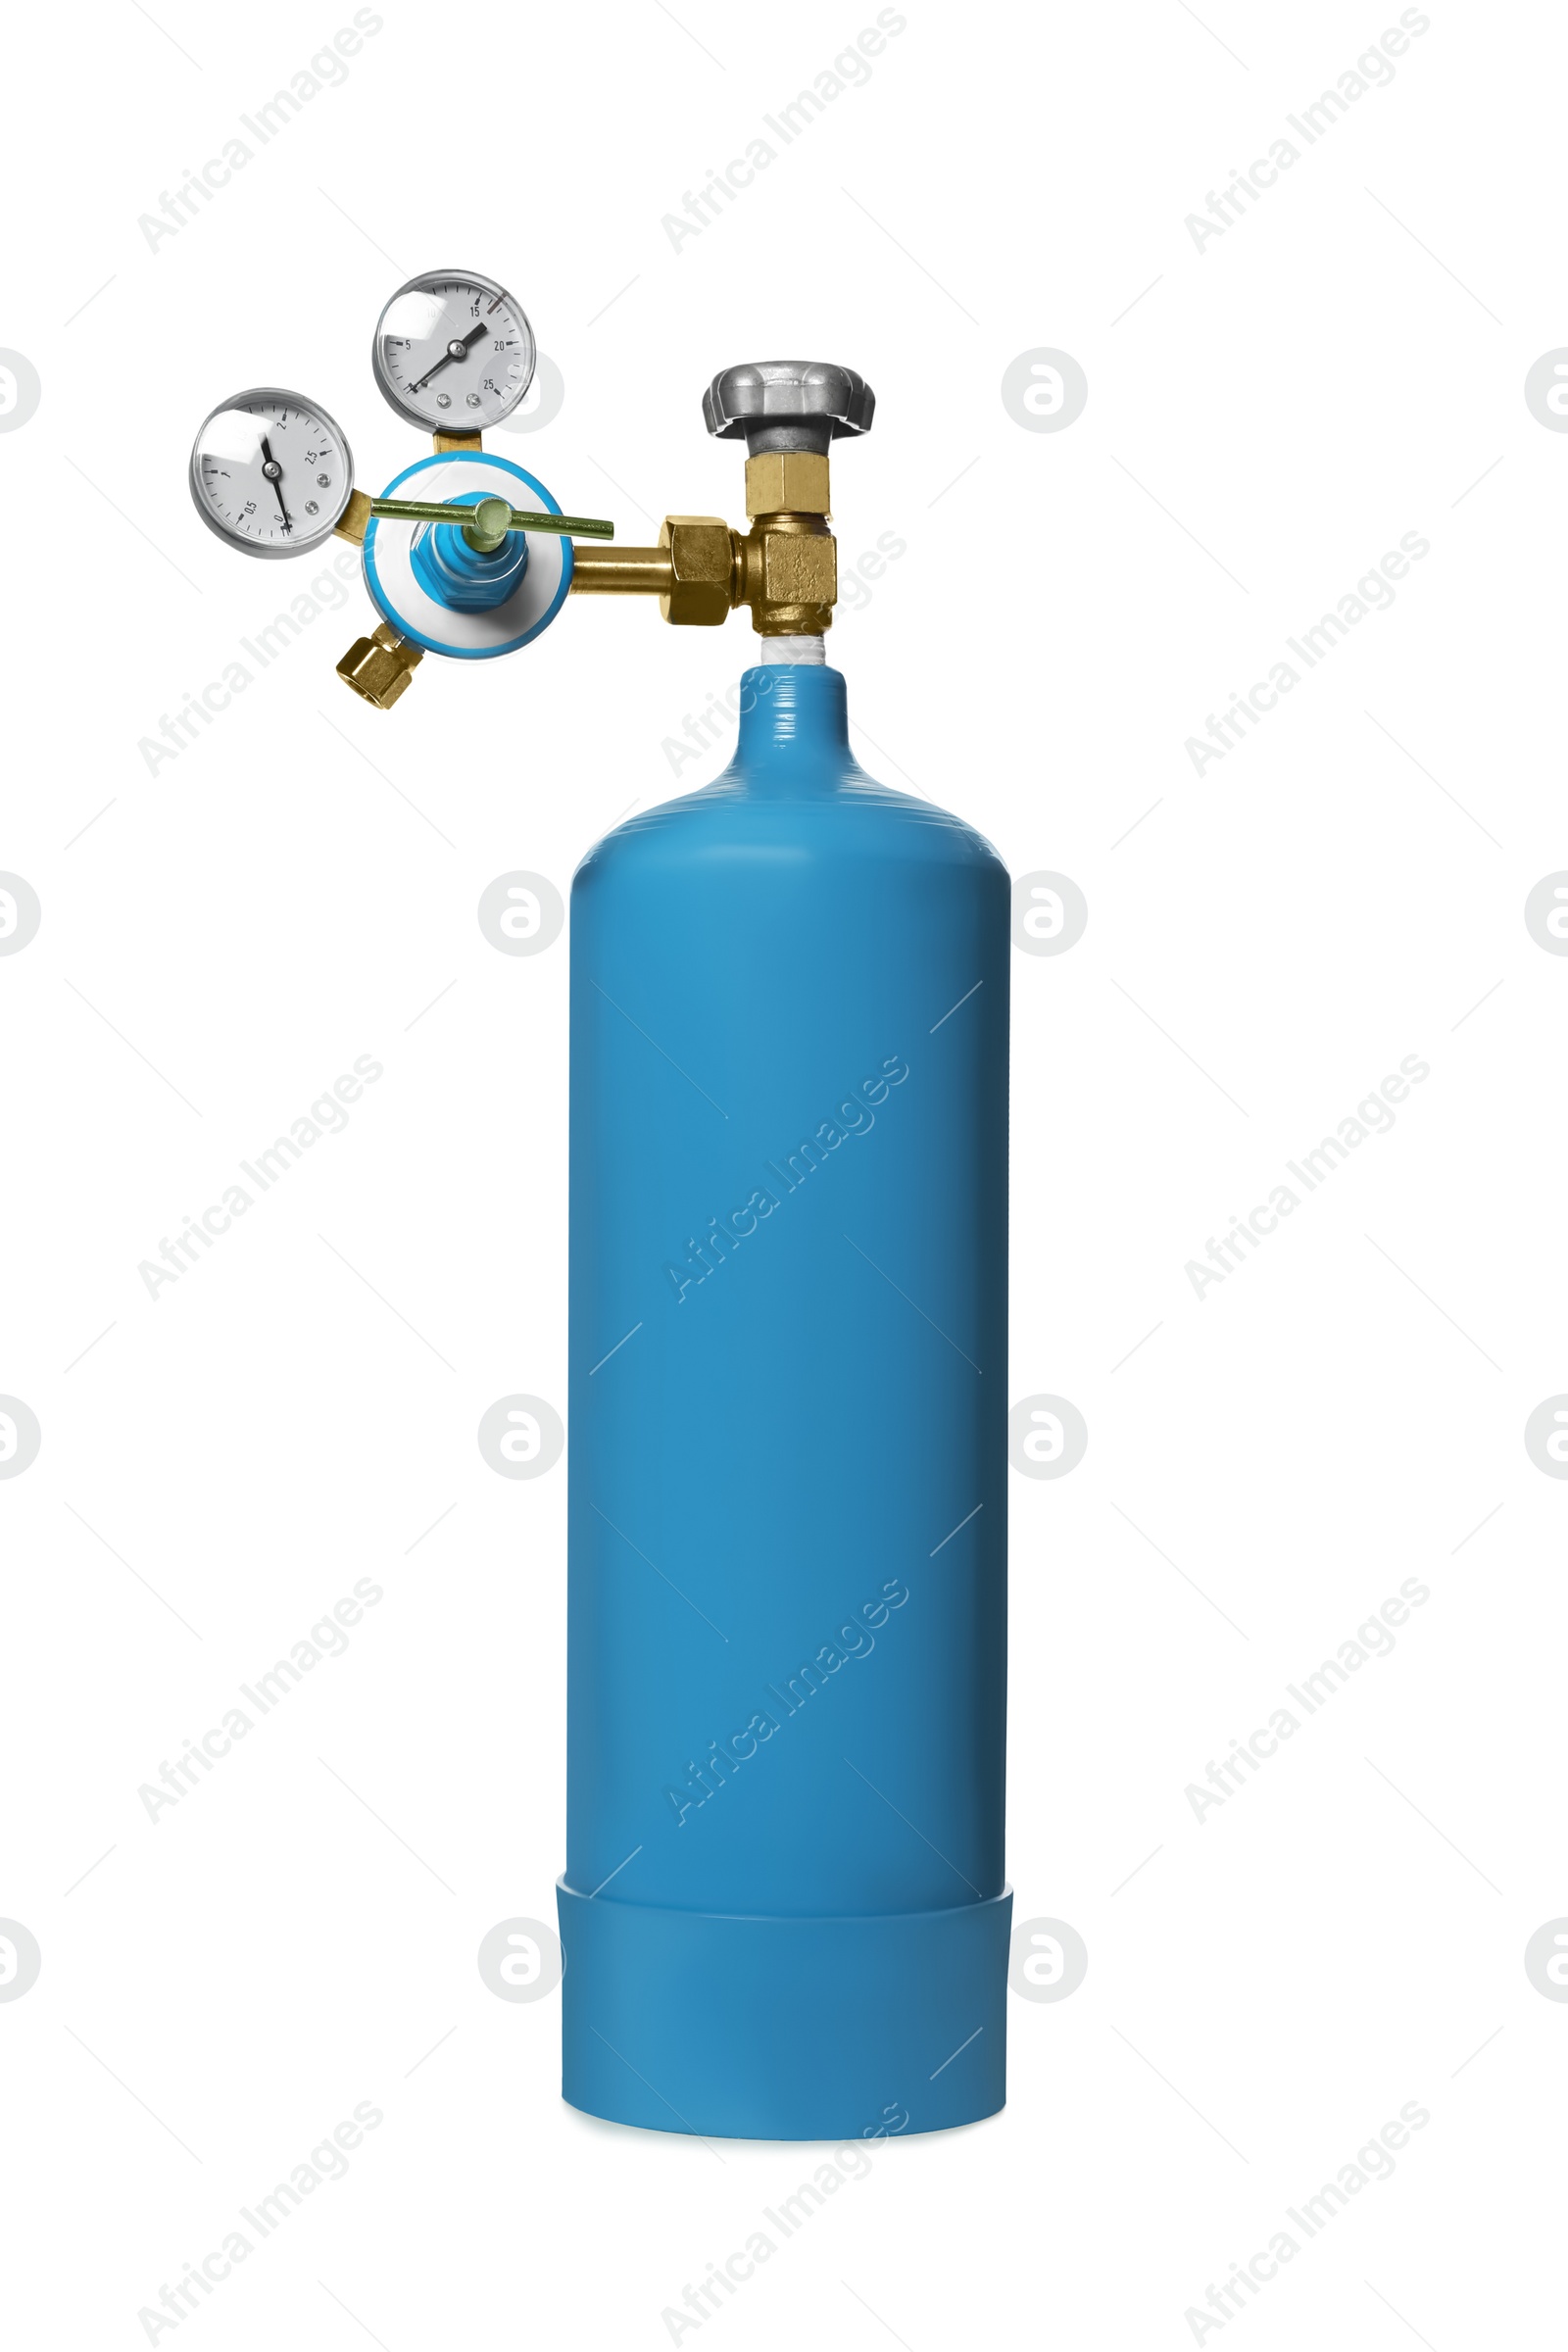 Photo of Oxygen tank isolated on white. Medical equipment